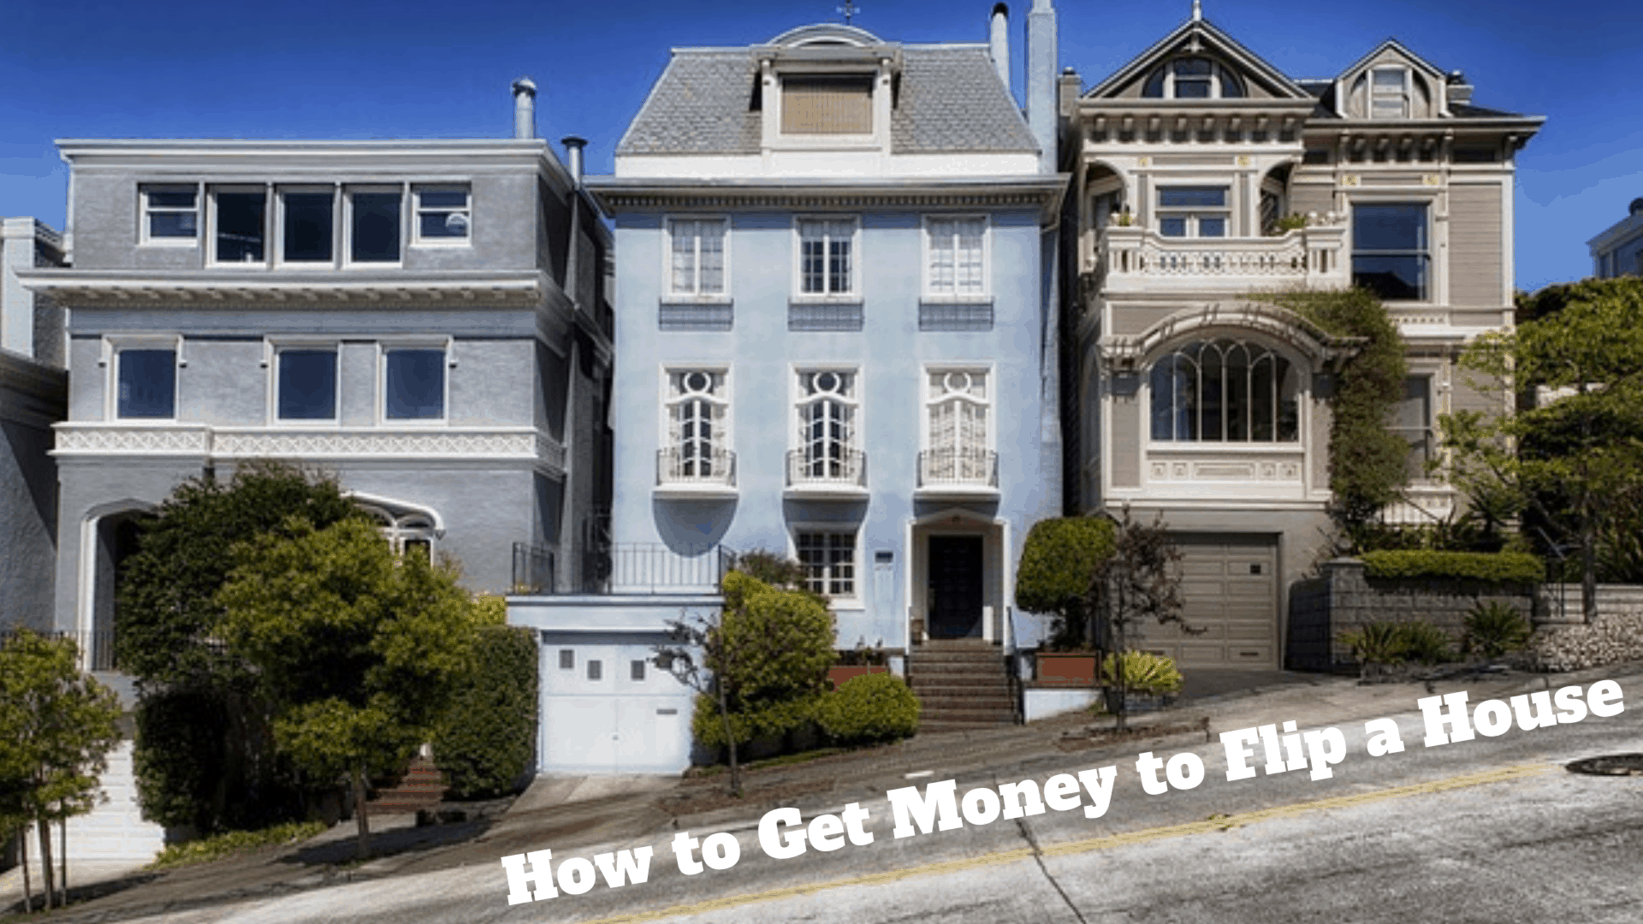 How to Get Money to Flip a House